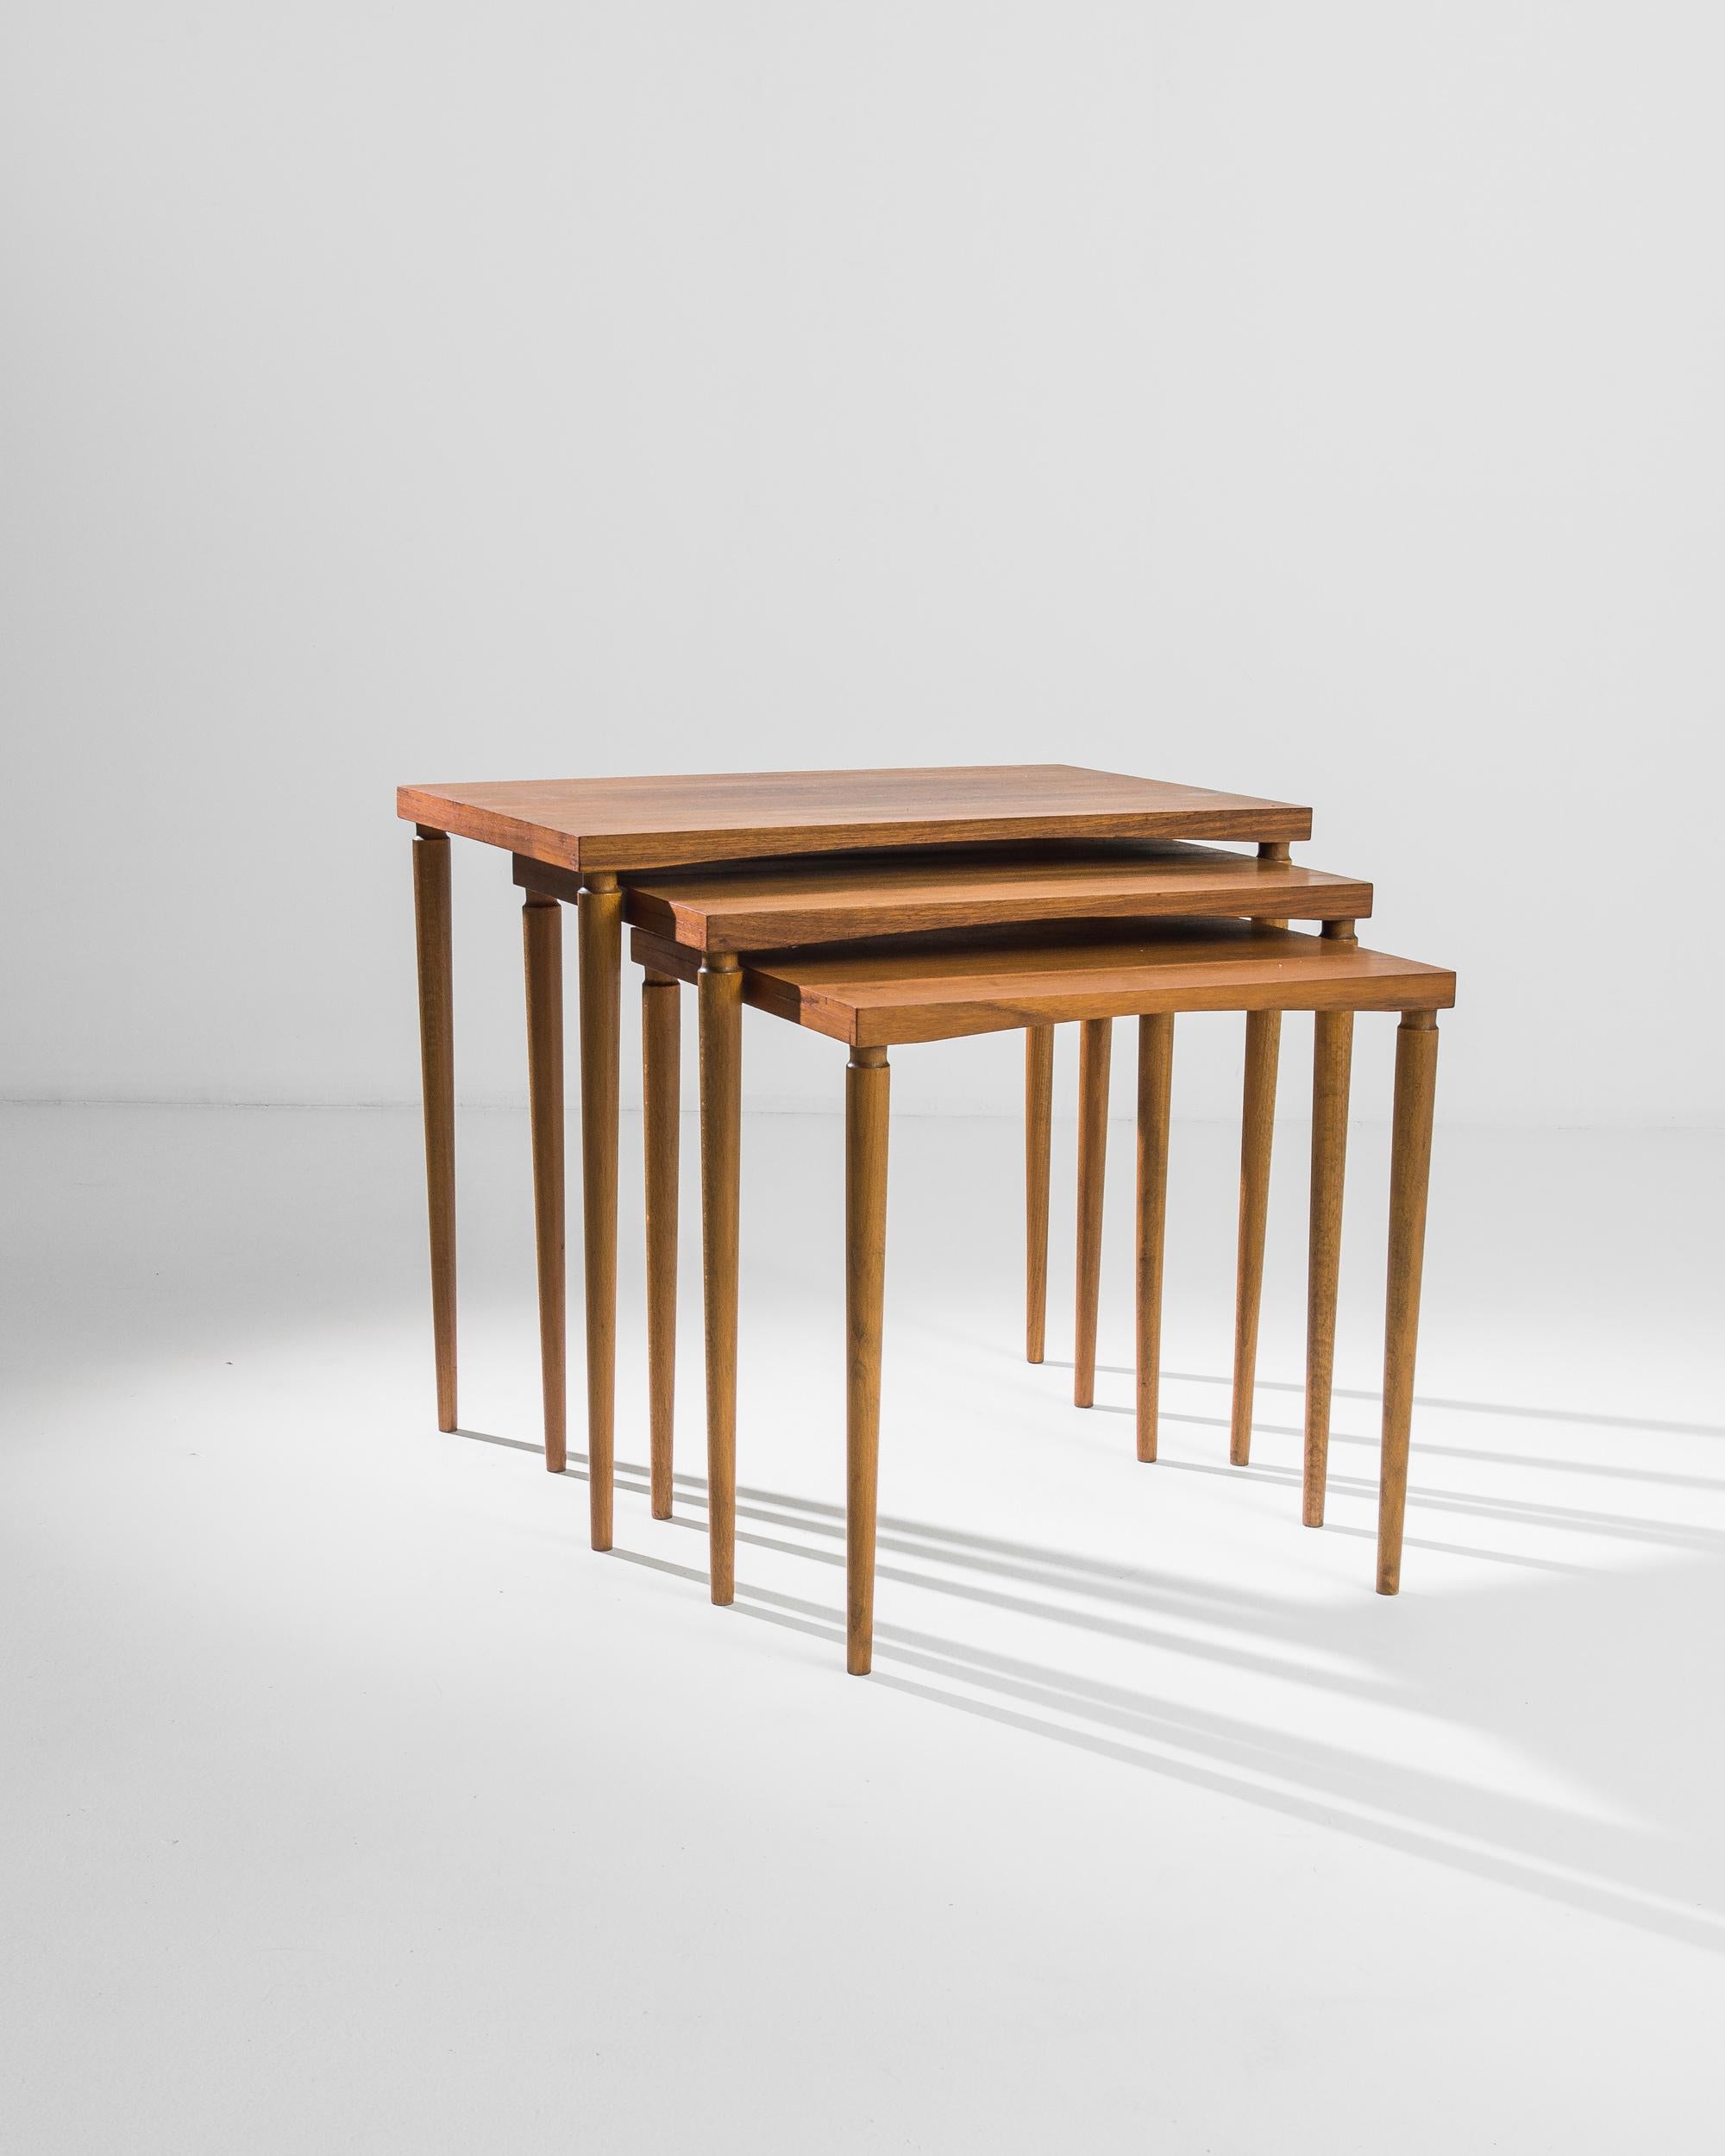 A set of mid-century nesting tables created in Denmark. Thin pencil legs and subtly sloping tops combine to form a subtle and elegant form. This set of tables is crafted using teak wood, indigenous to Indonesia, but considered a carpentry staple in